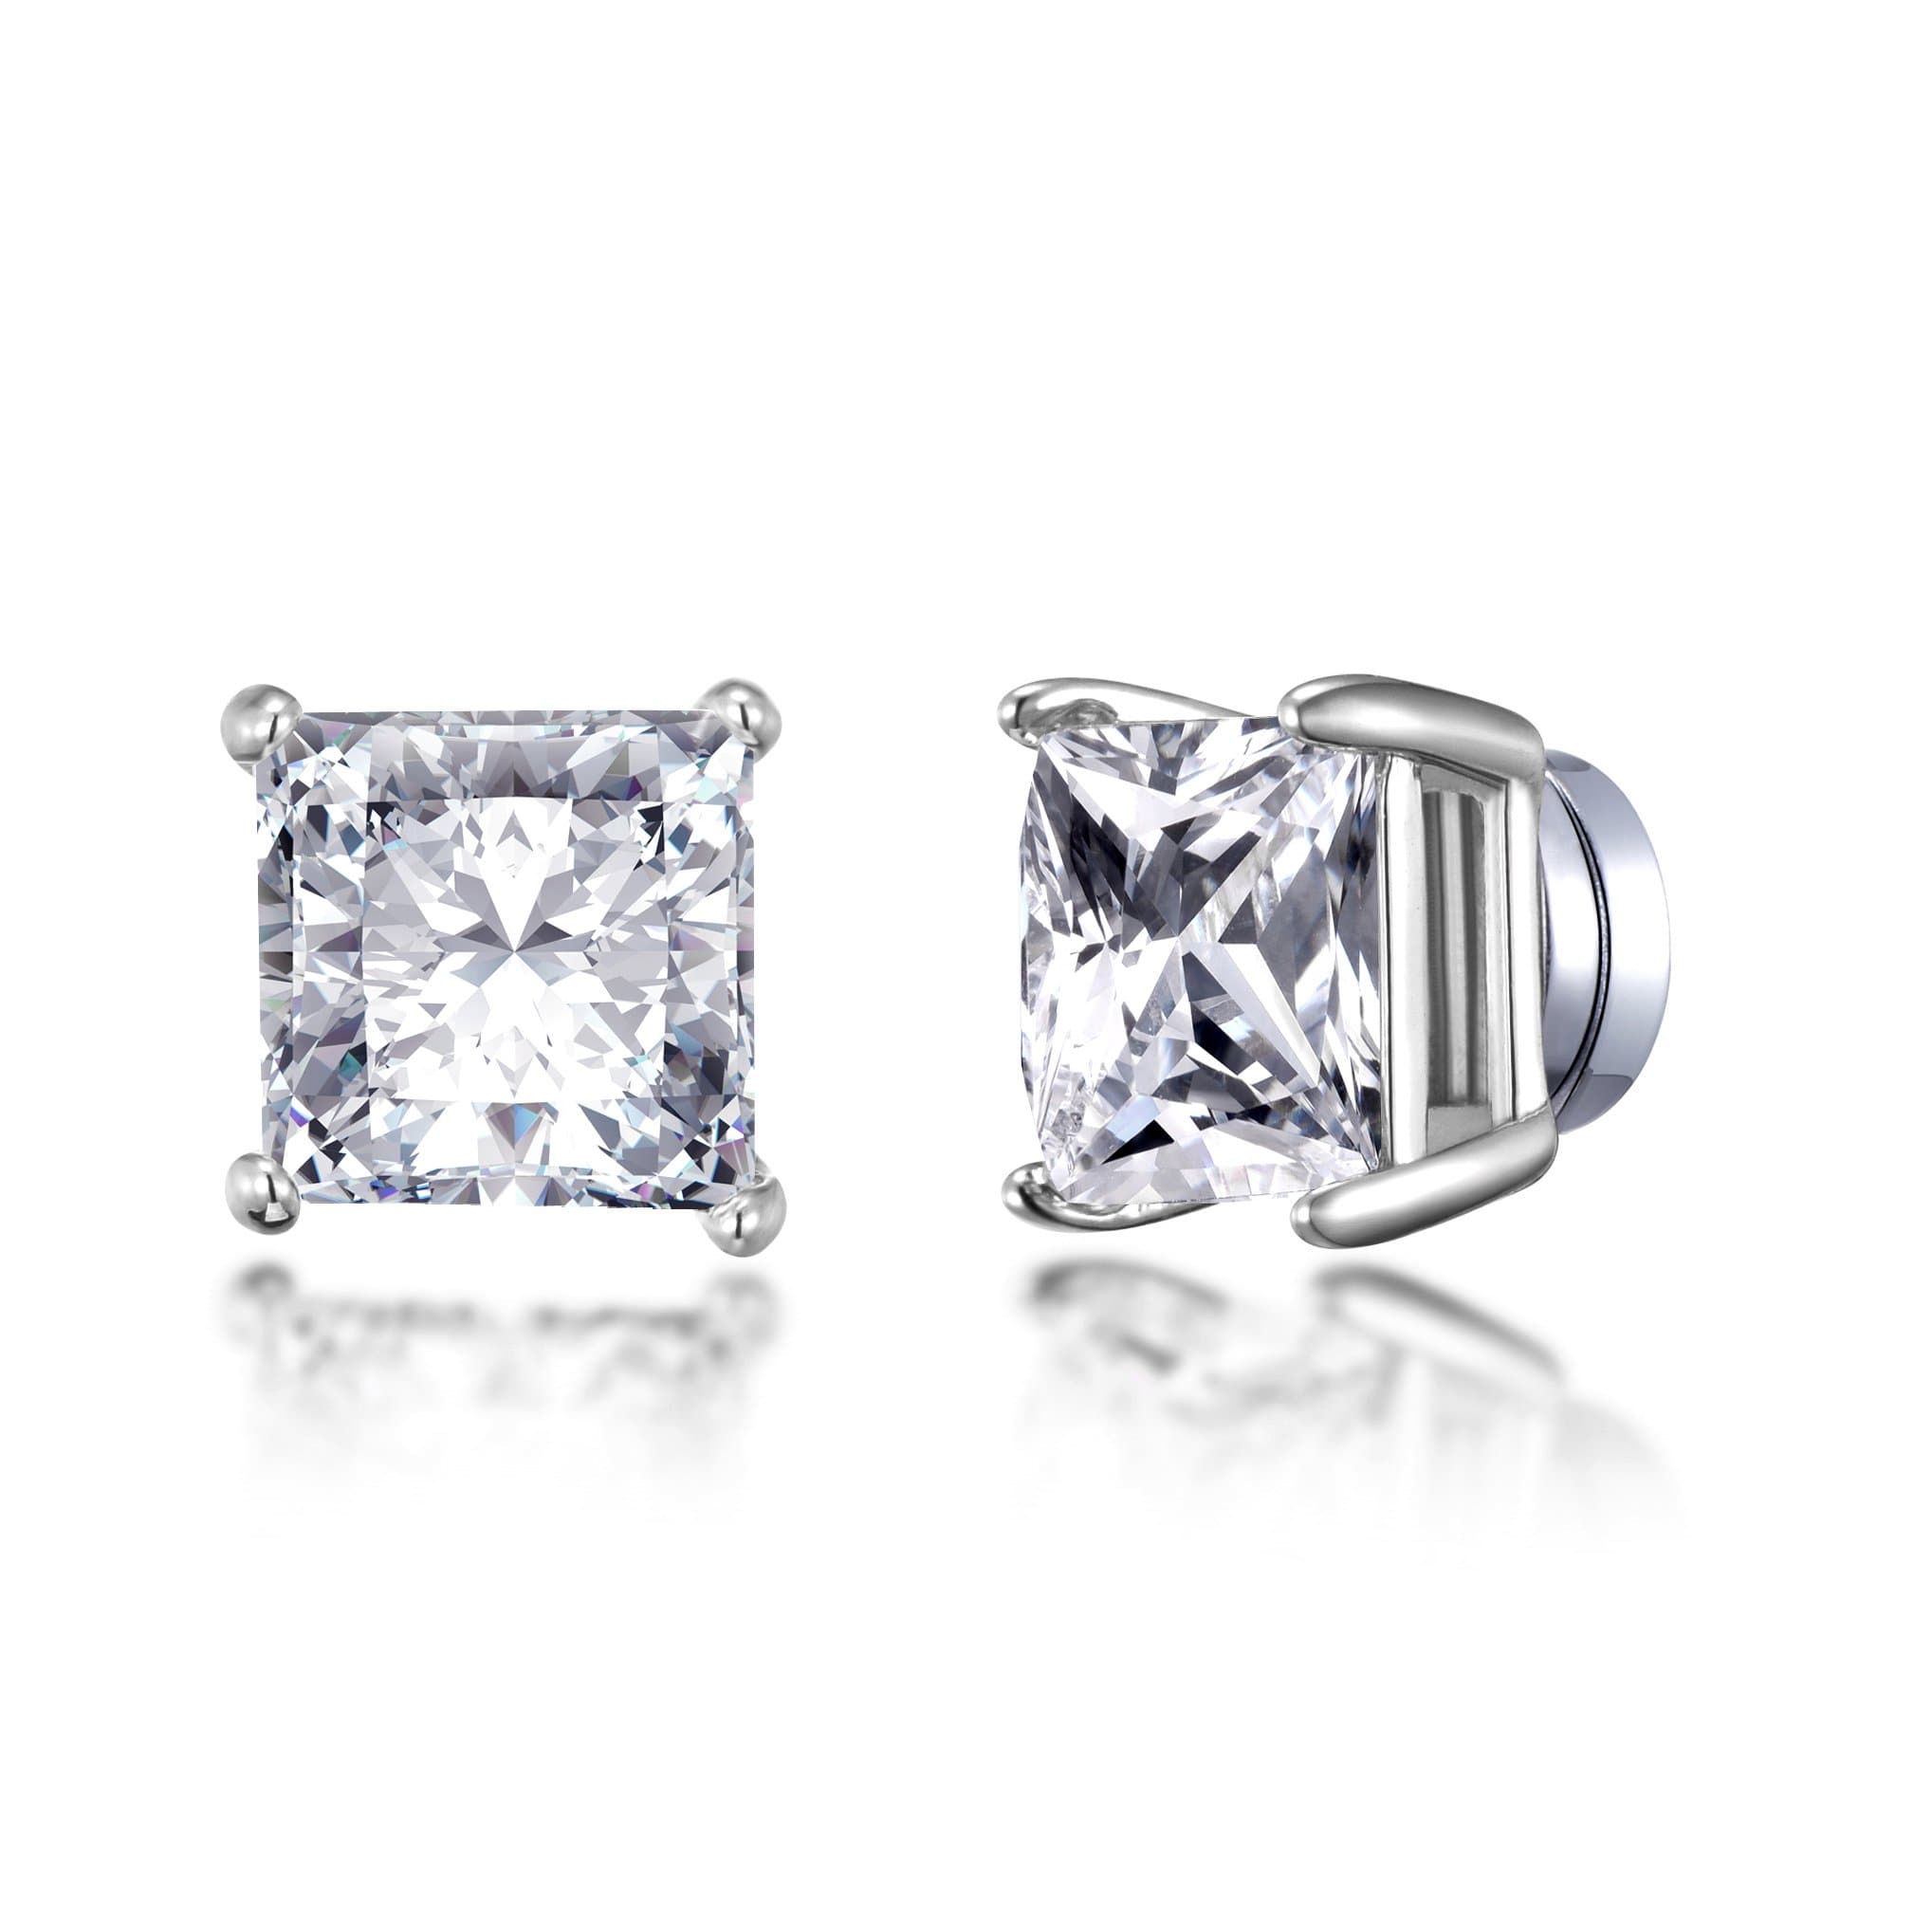 Men's Silver Plated Square Magnetic Clip On Stud Earrings Created with Zircondia® Crystals by Philip Jones Jewellery